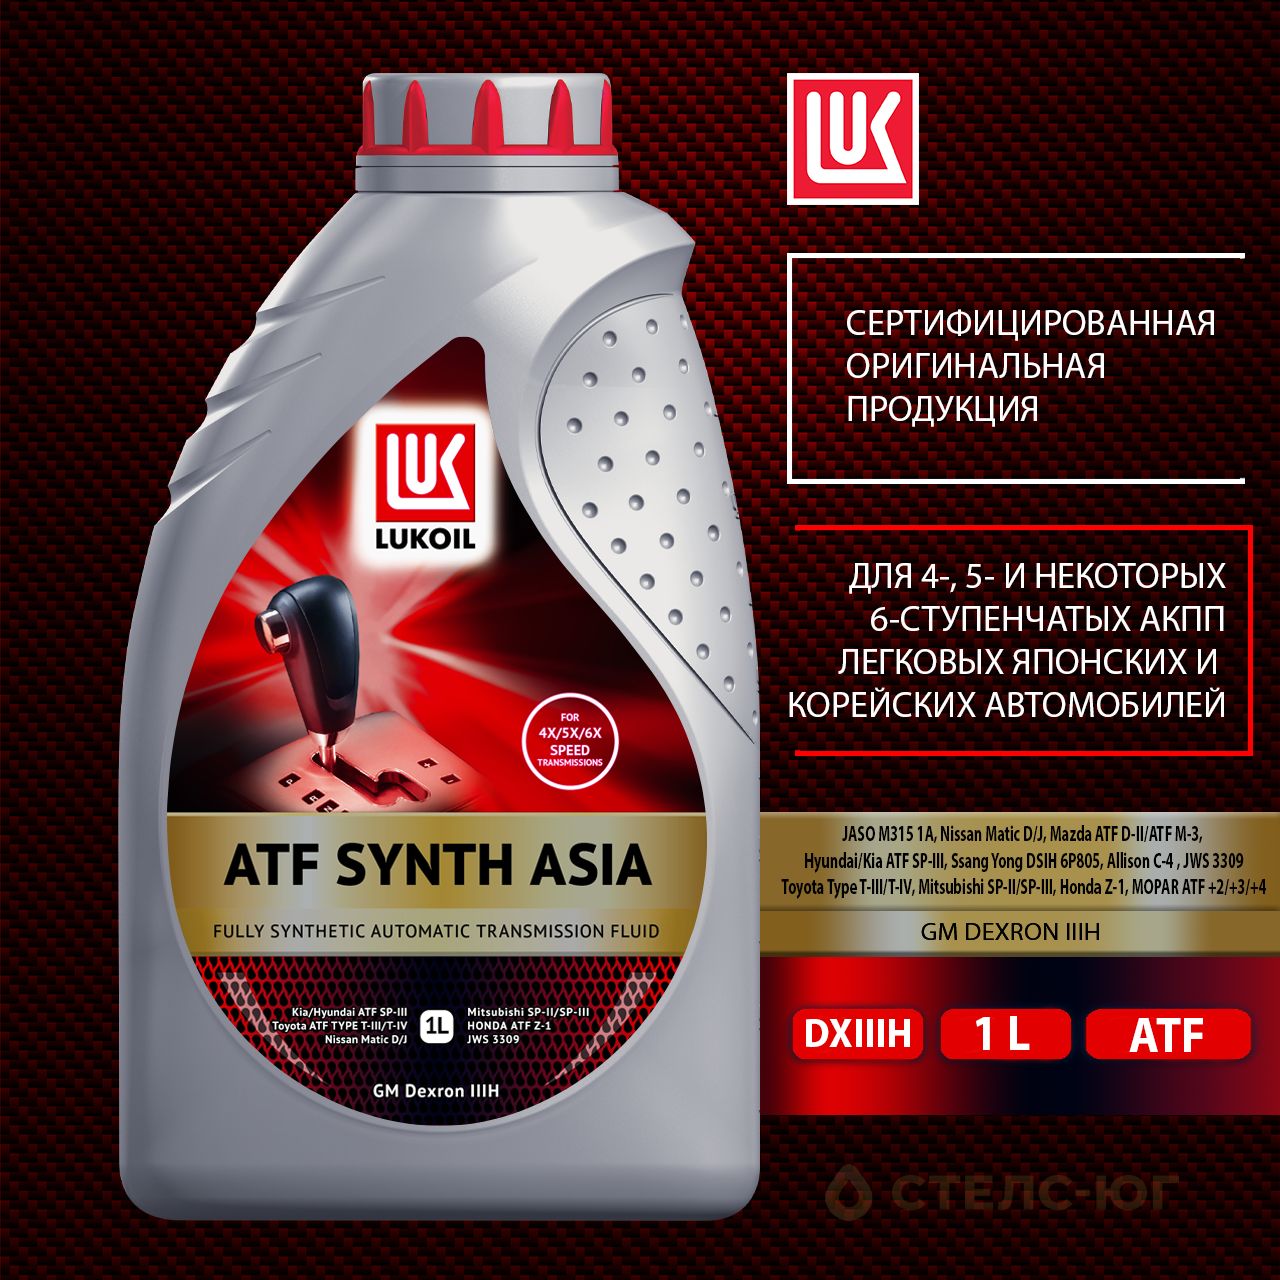 Масло лукойл atf synth. Lukoil ATF Synth Asia. Масло трансмиссионное Лукойл ATF Synth Asia 1л.. Лукойл ATF Synth Asia 4. Лукойл 3132619 жидкость трансмиссионная.